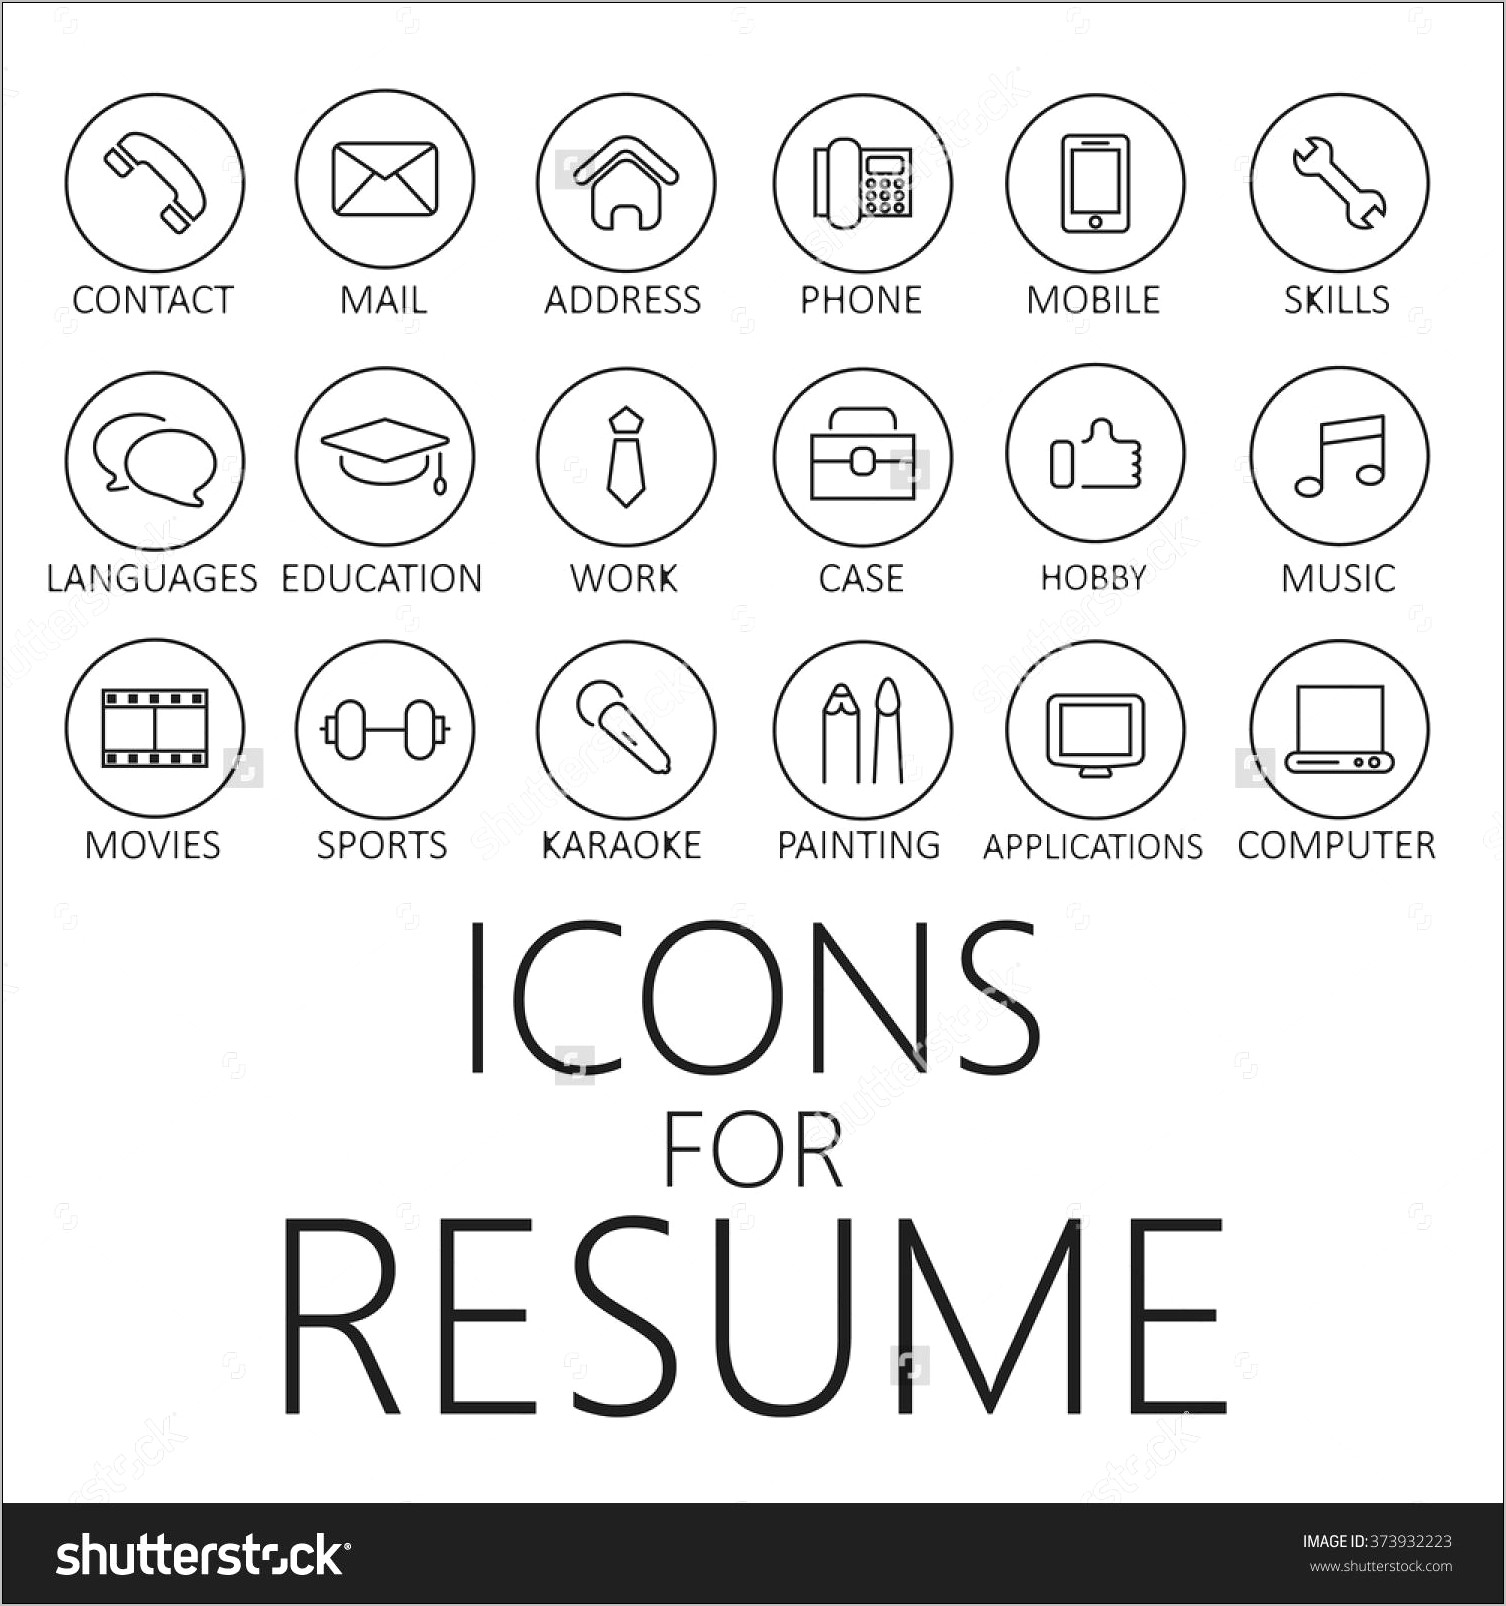 Objective Icon Png For Resume